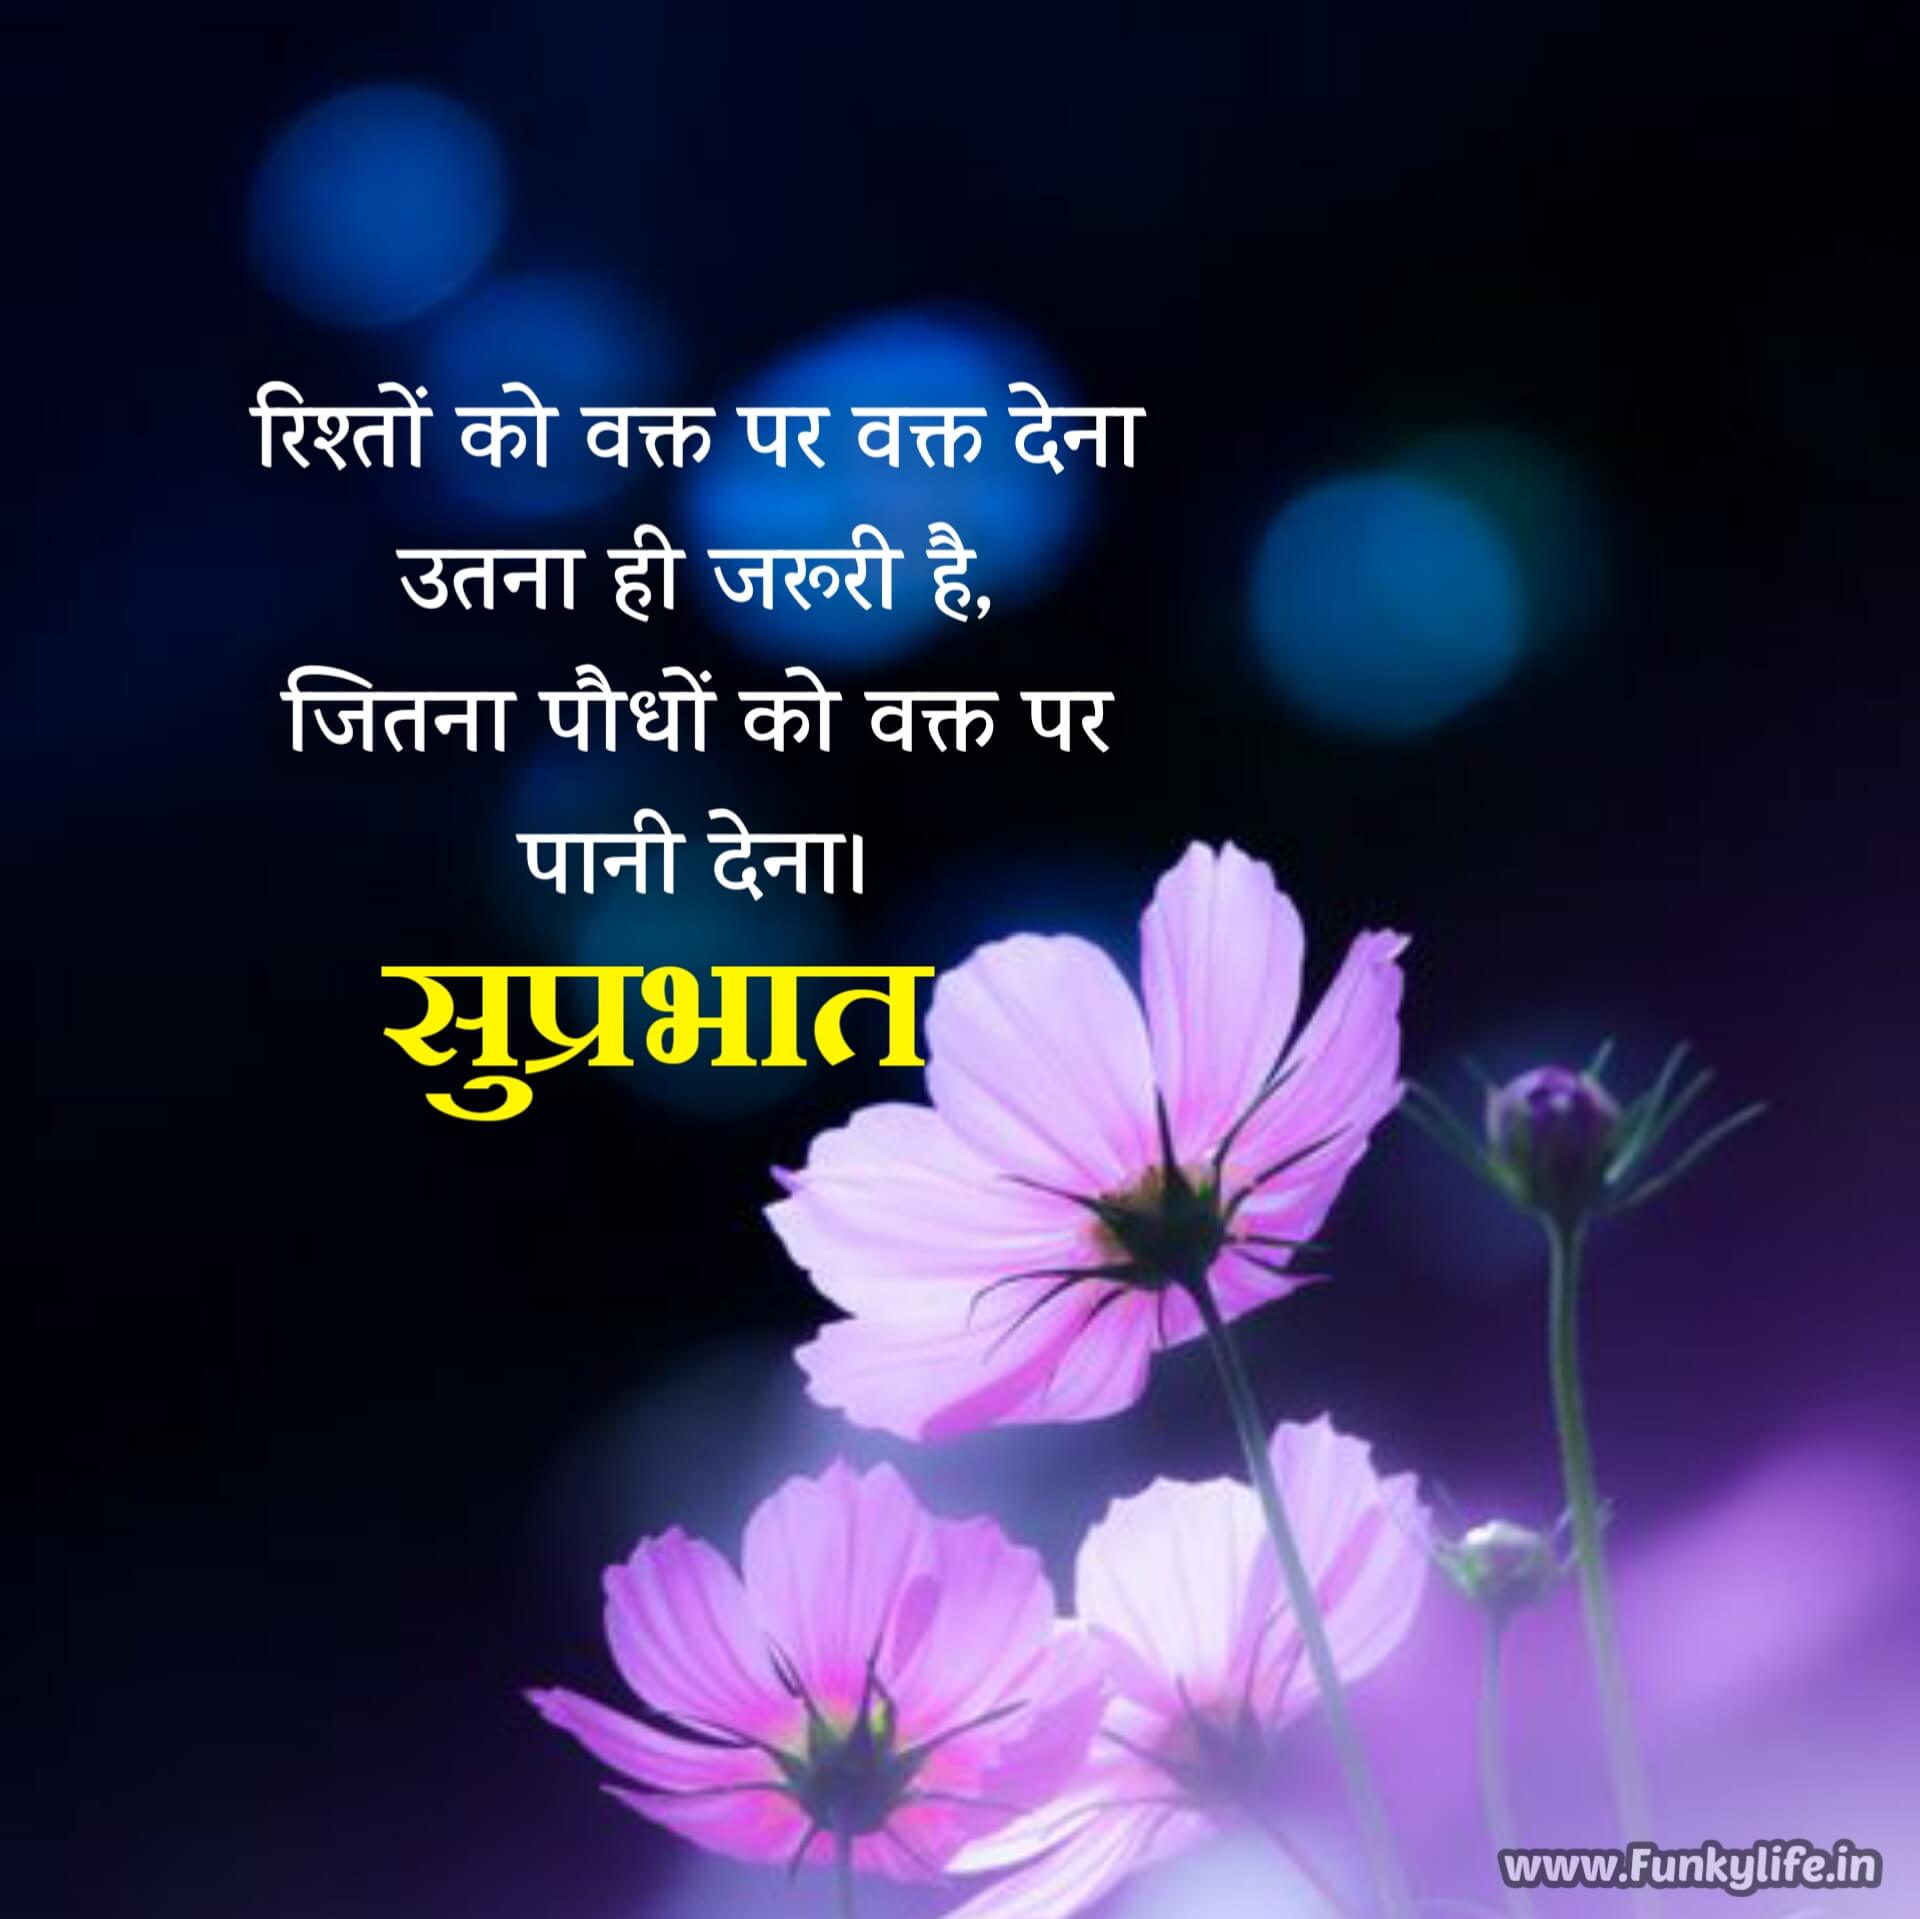 Good Morning Quotes in Hindi for relations